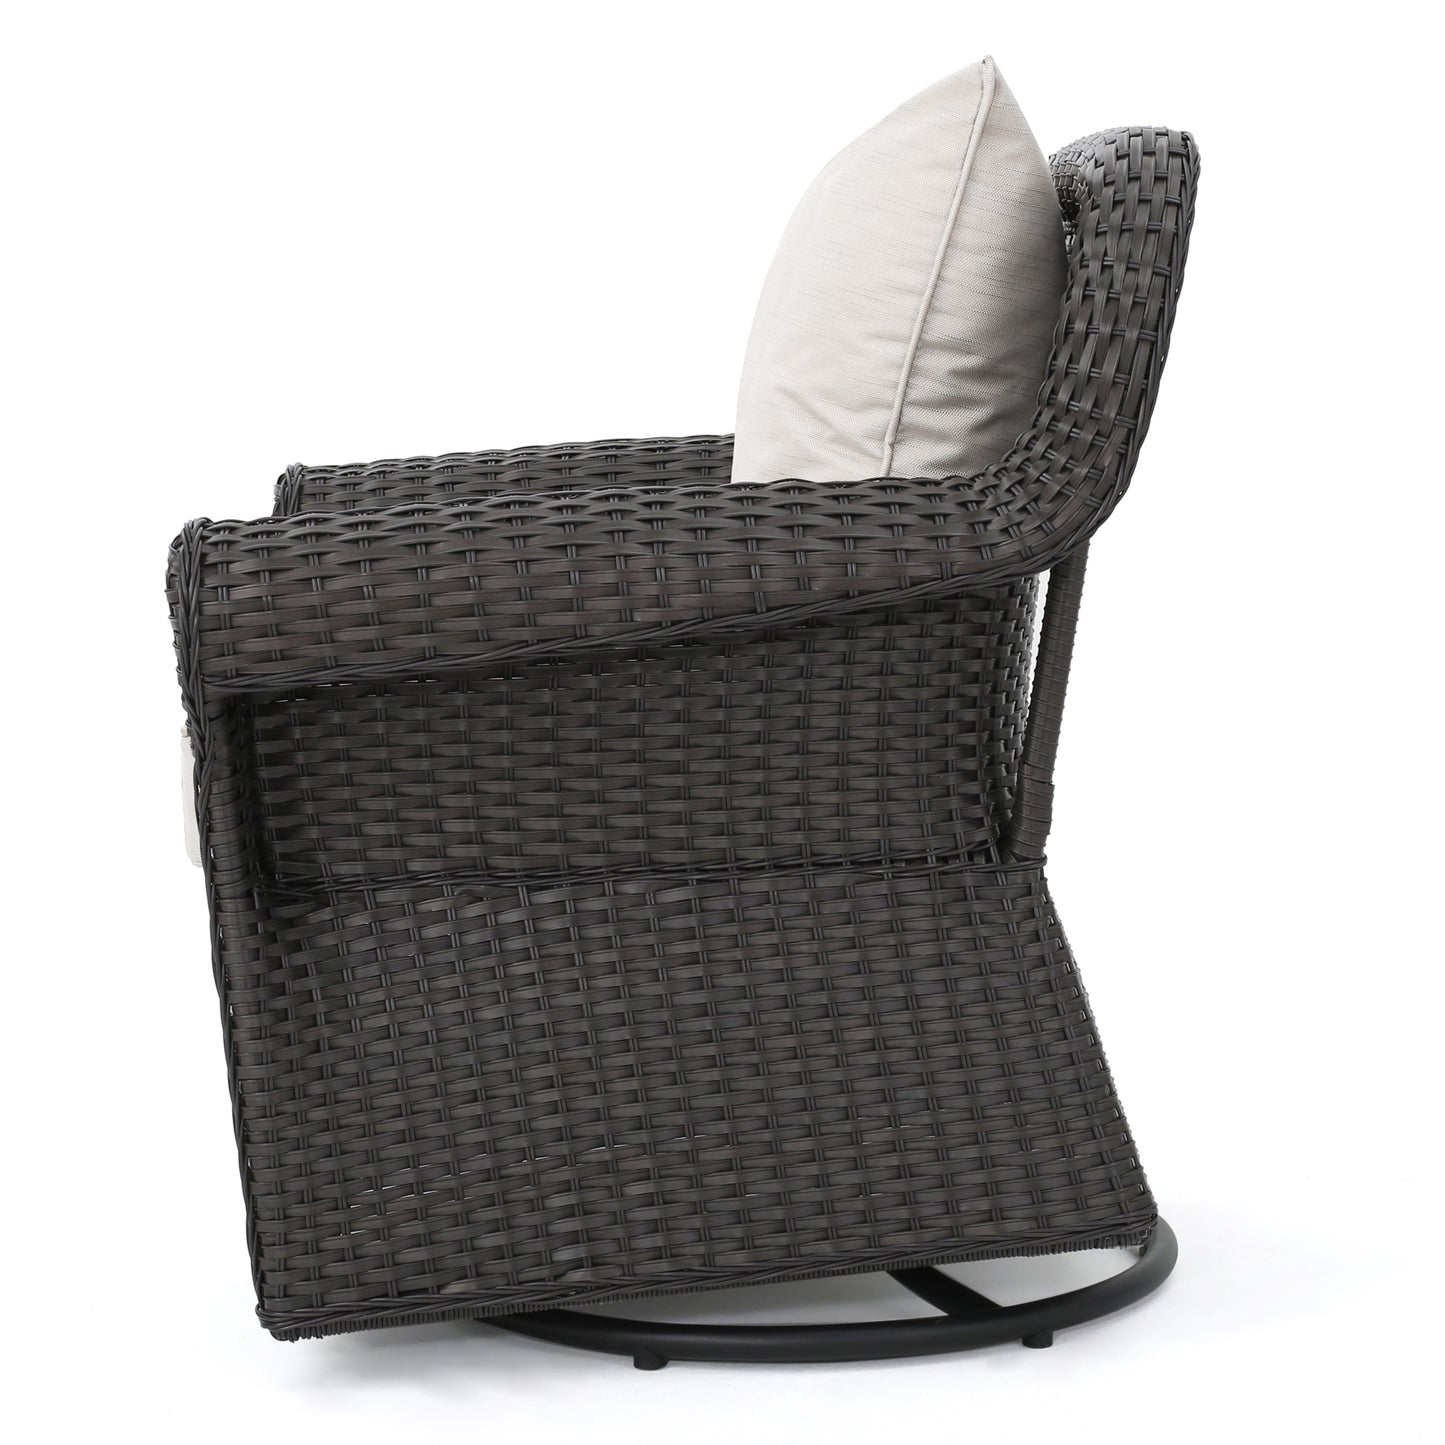 Admiral Outdoor Wicker Swivel Rocking Chair w/Water Resistant Cushions